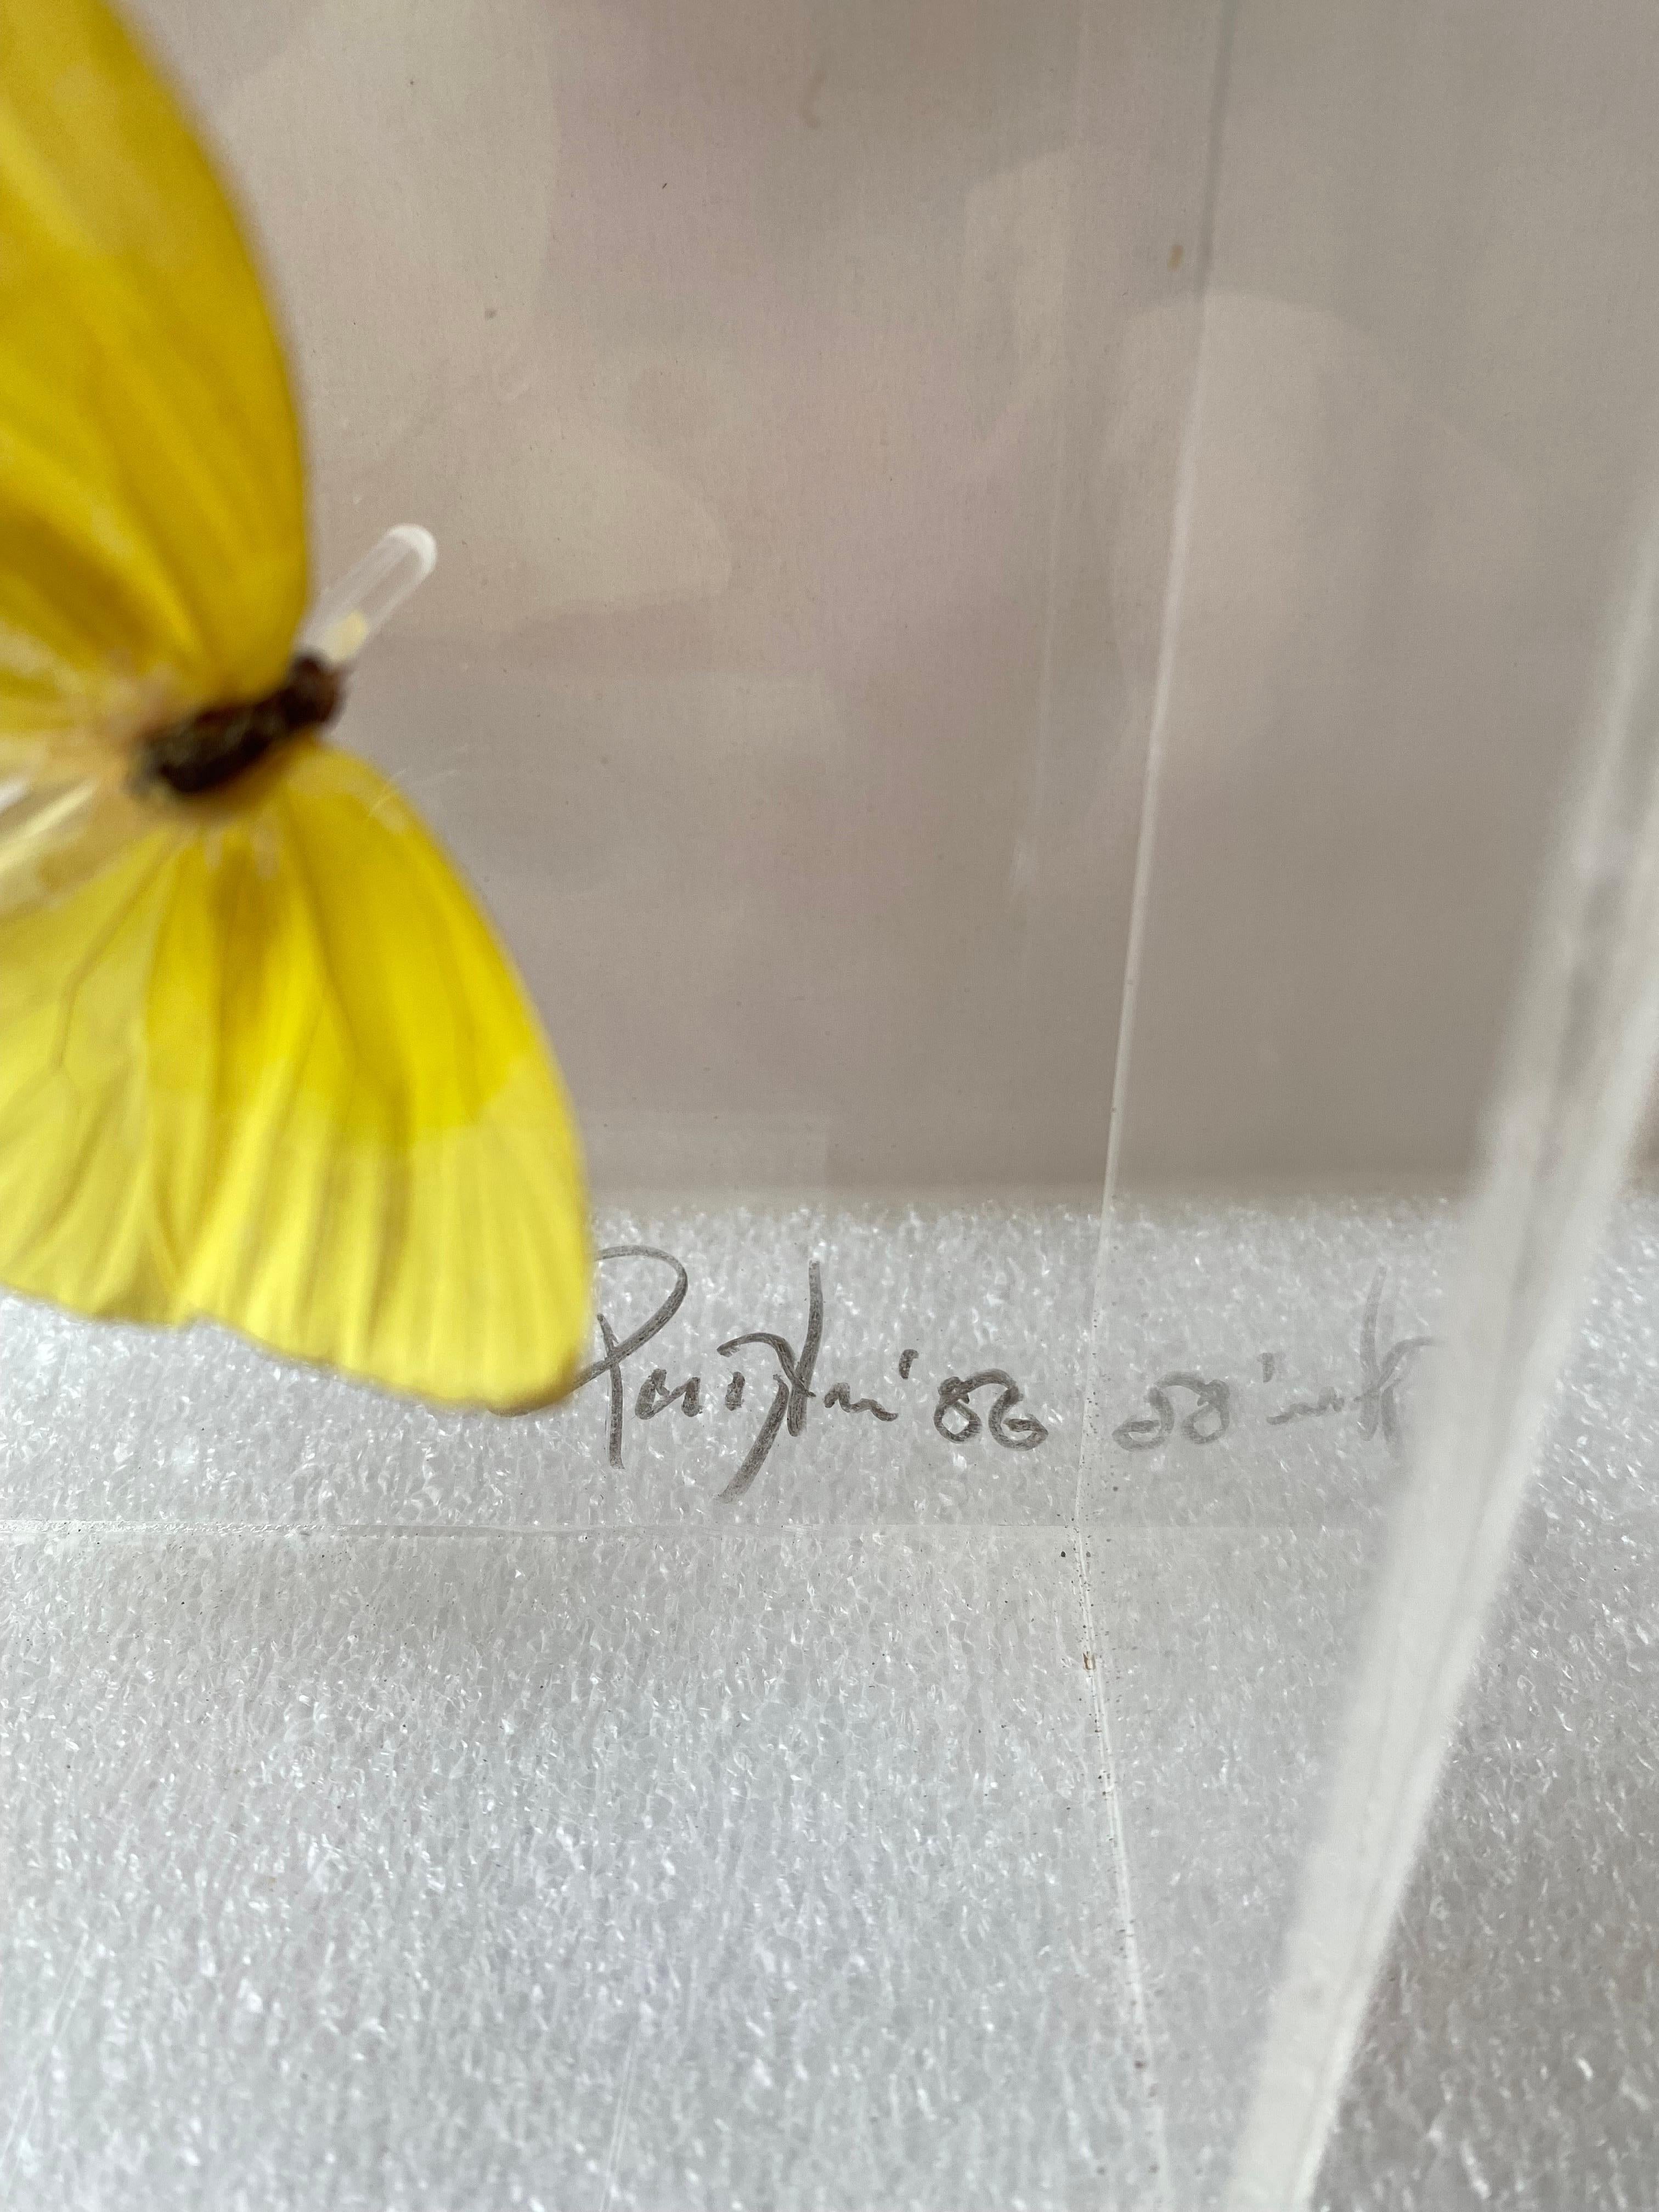 Paul Purington Butterflies in 2 Lucite Boxes For Sale 5